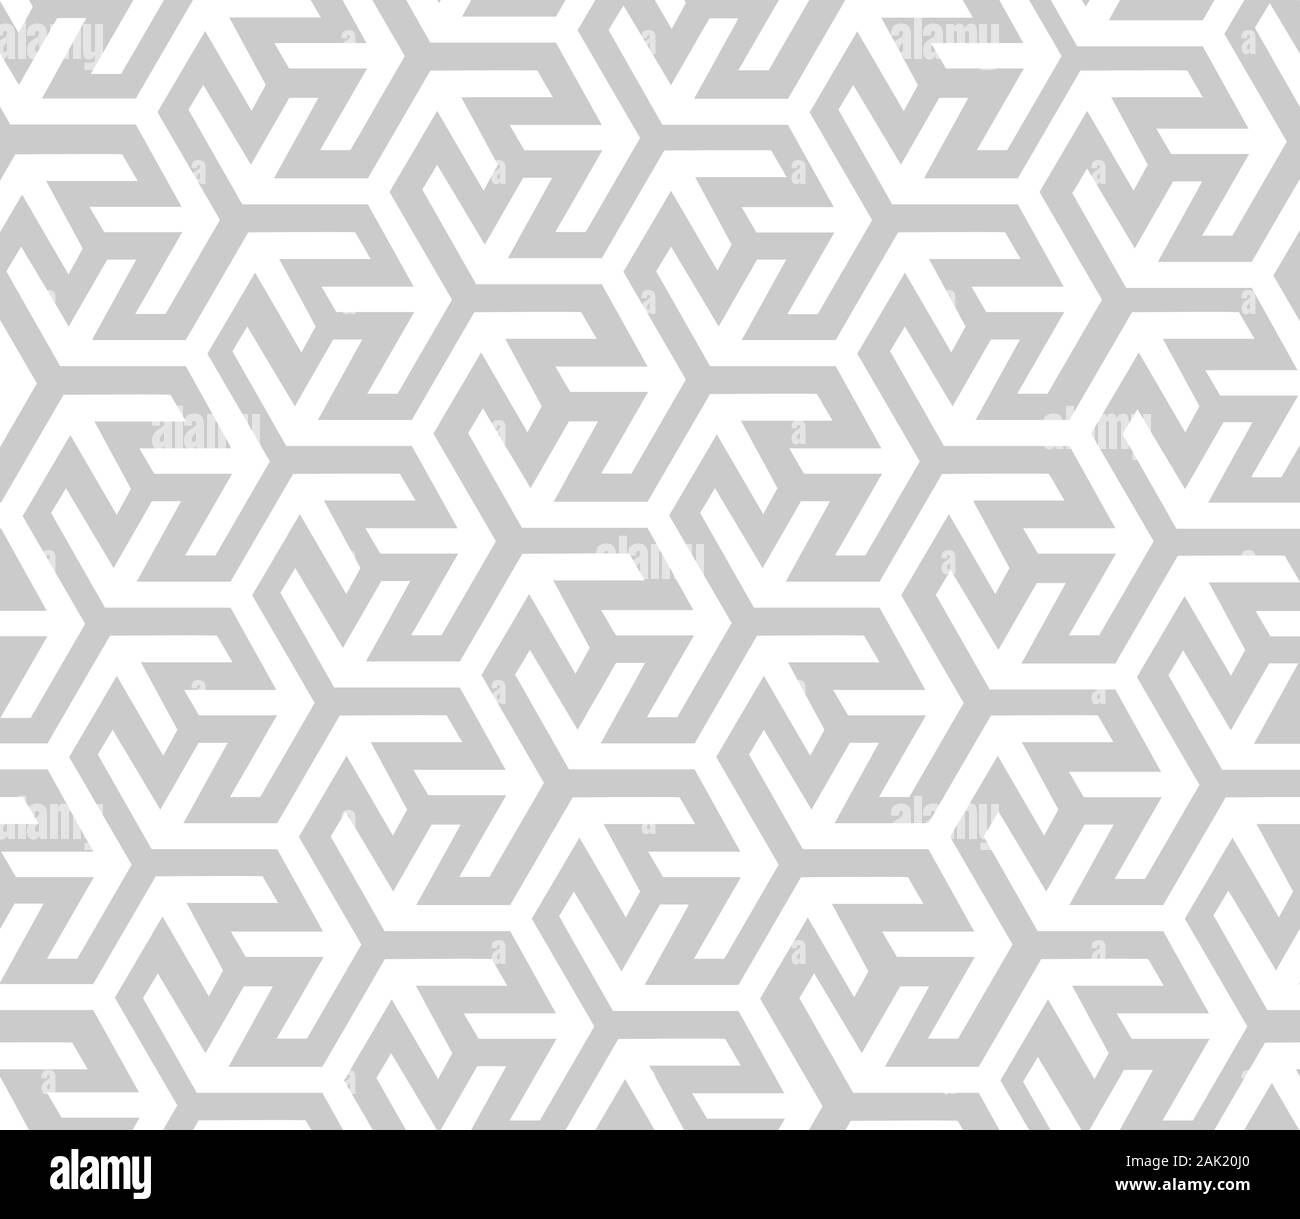 Cube line seamless repeat pattern background Stock Photo